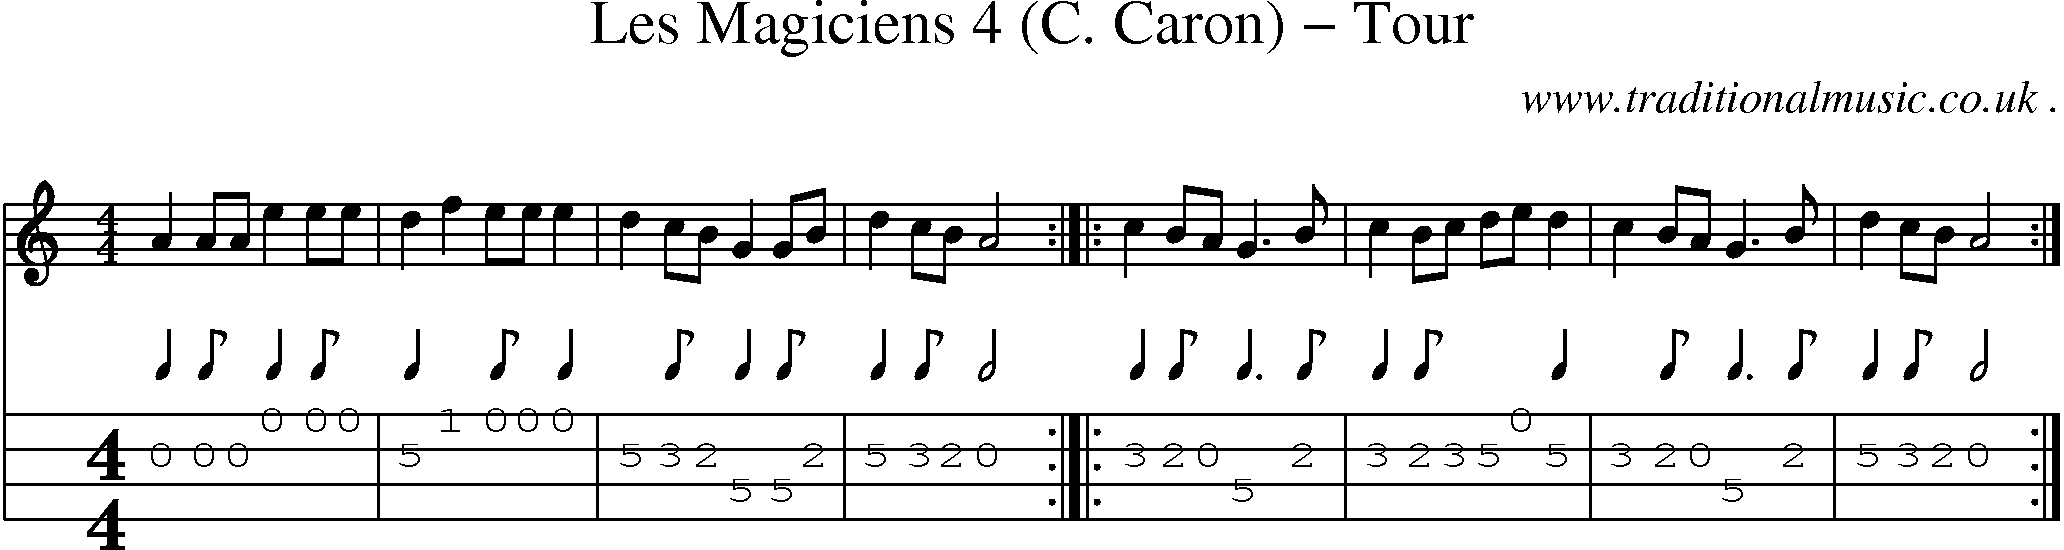 Sheet-Music and Mandolin Tabs for Les Magiciens 4 (c Caron) Tour